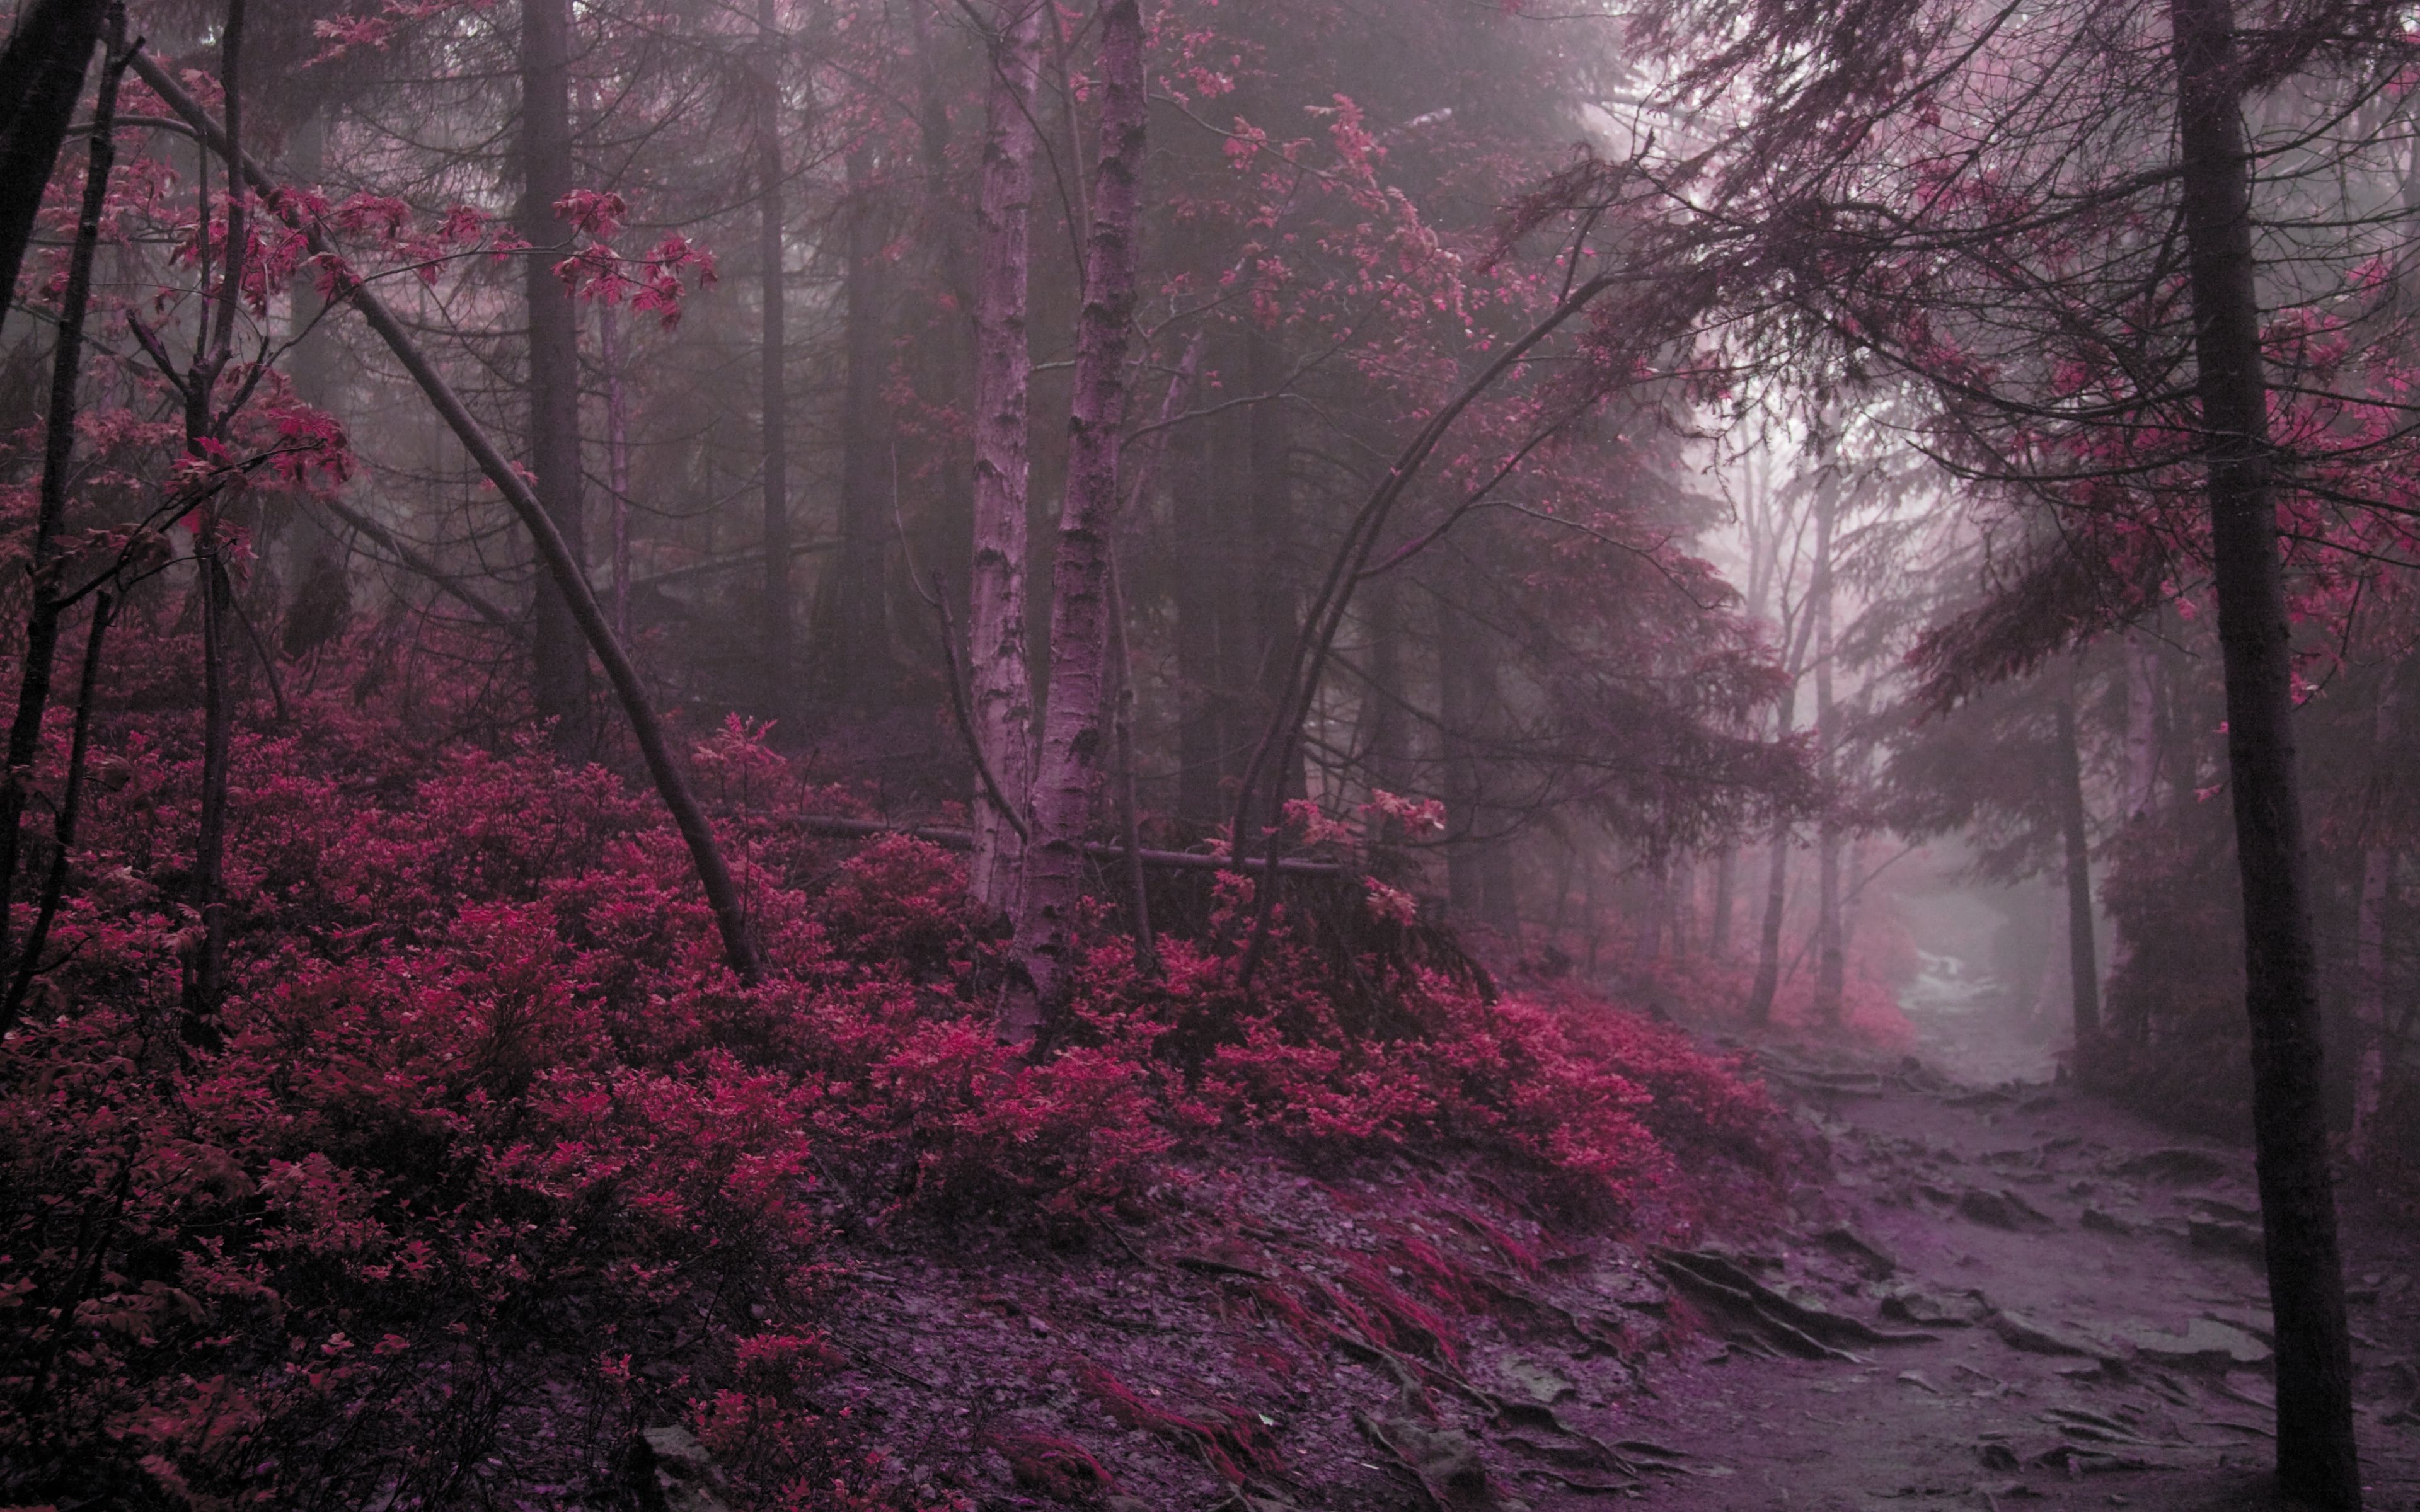 A forest with trees and flowers in it - Woods